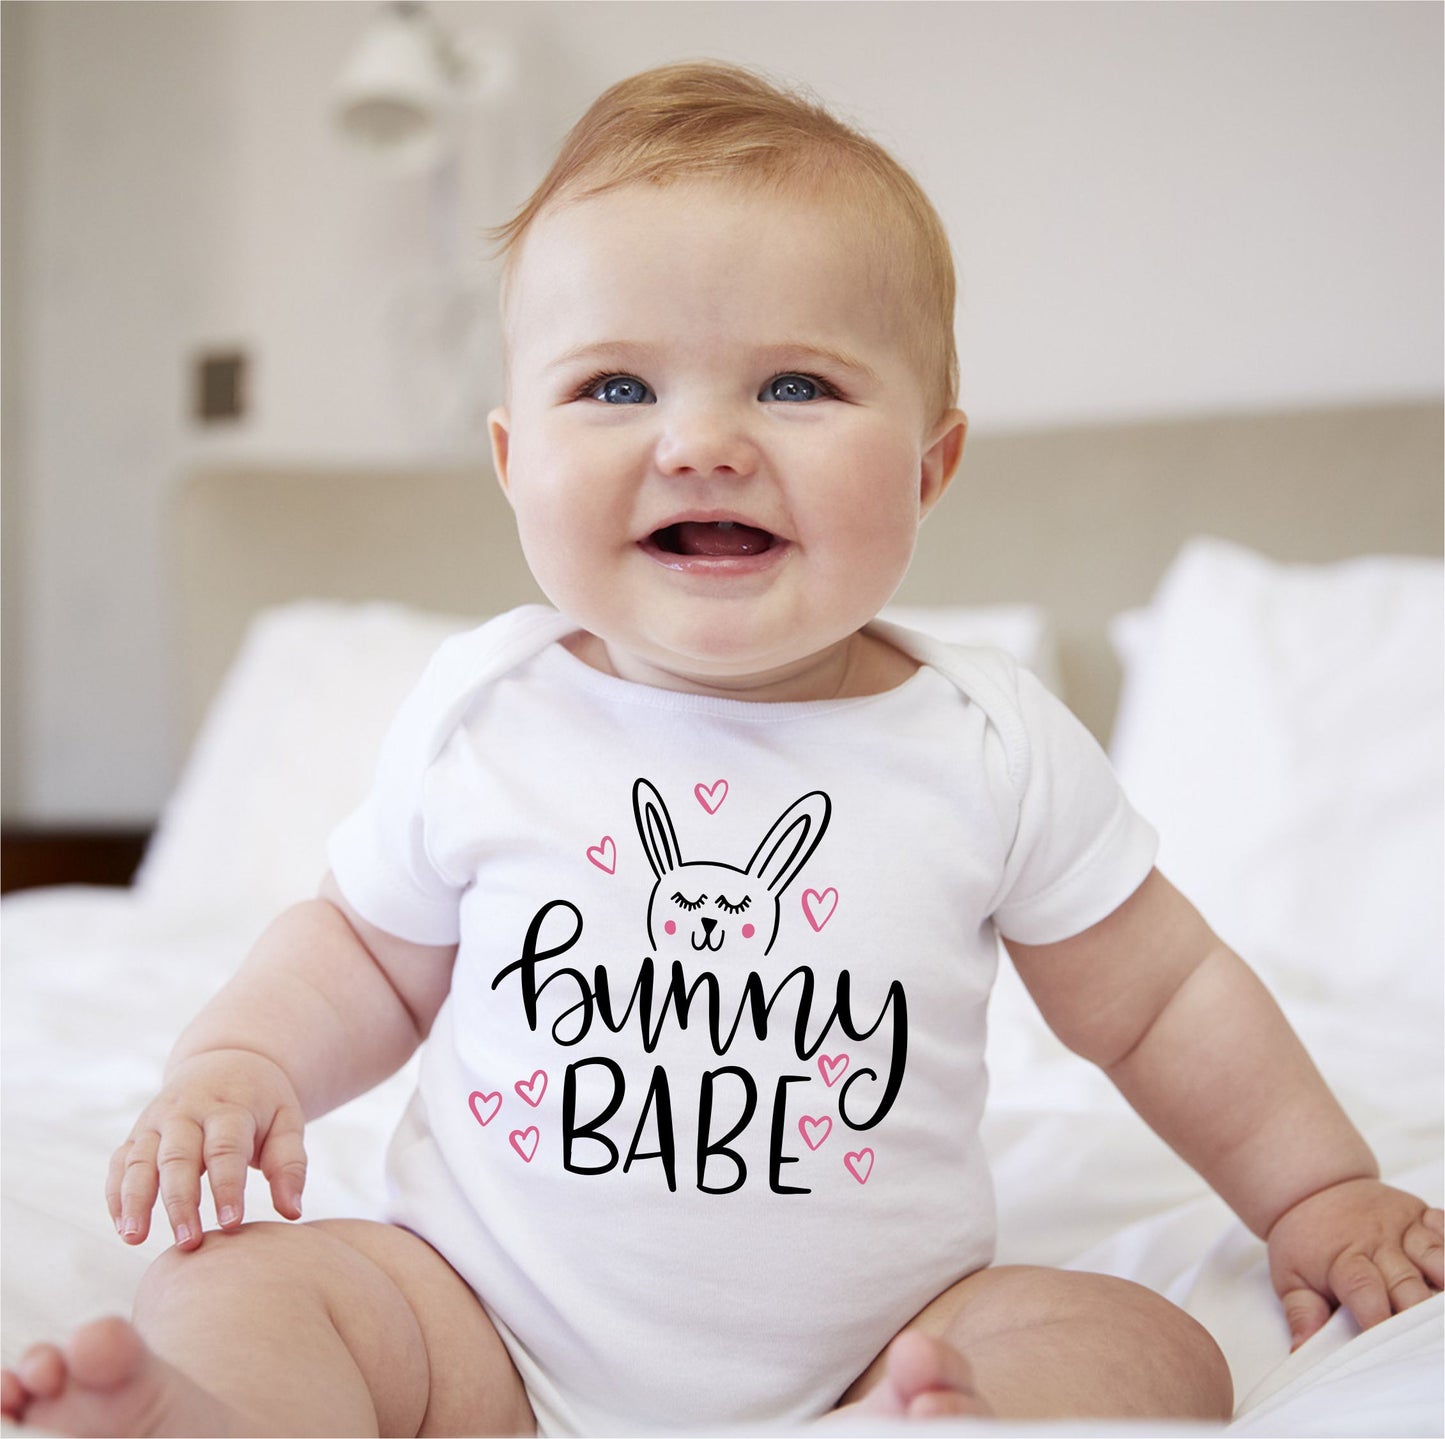 Baby Easter Onesies - Bunny Babe